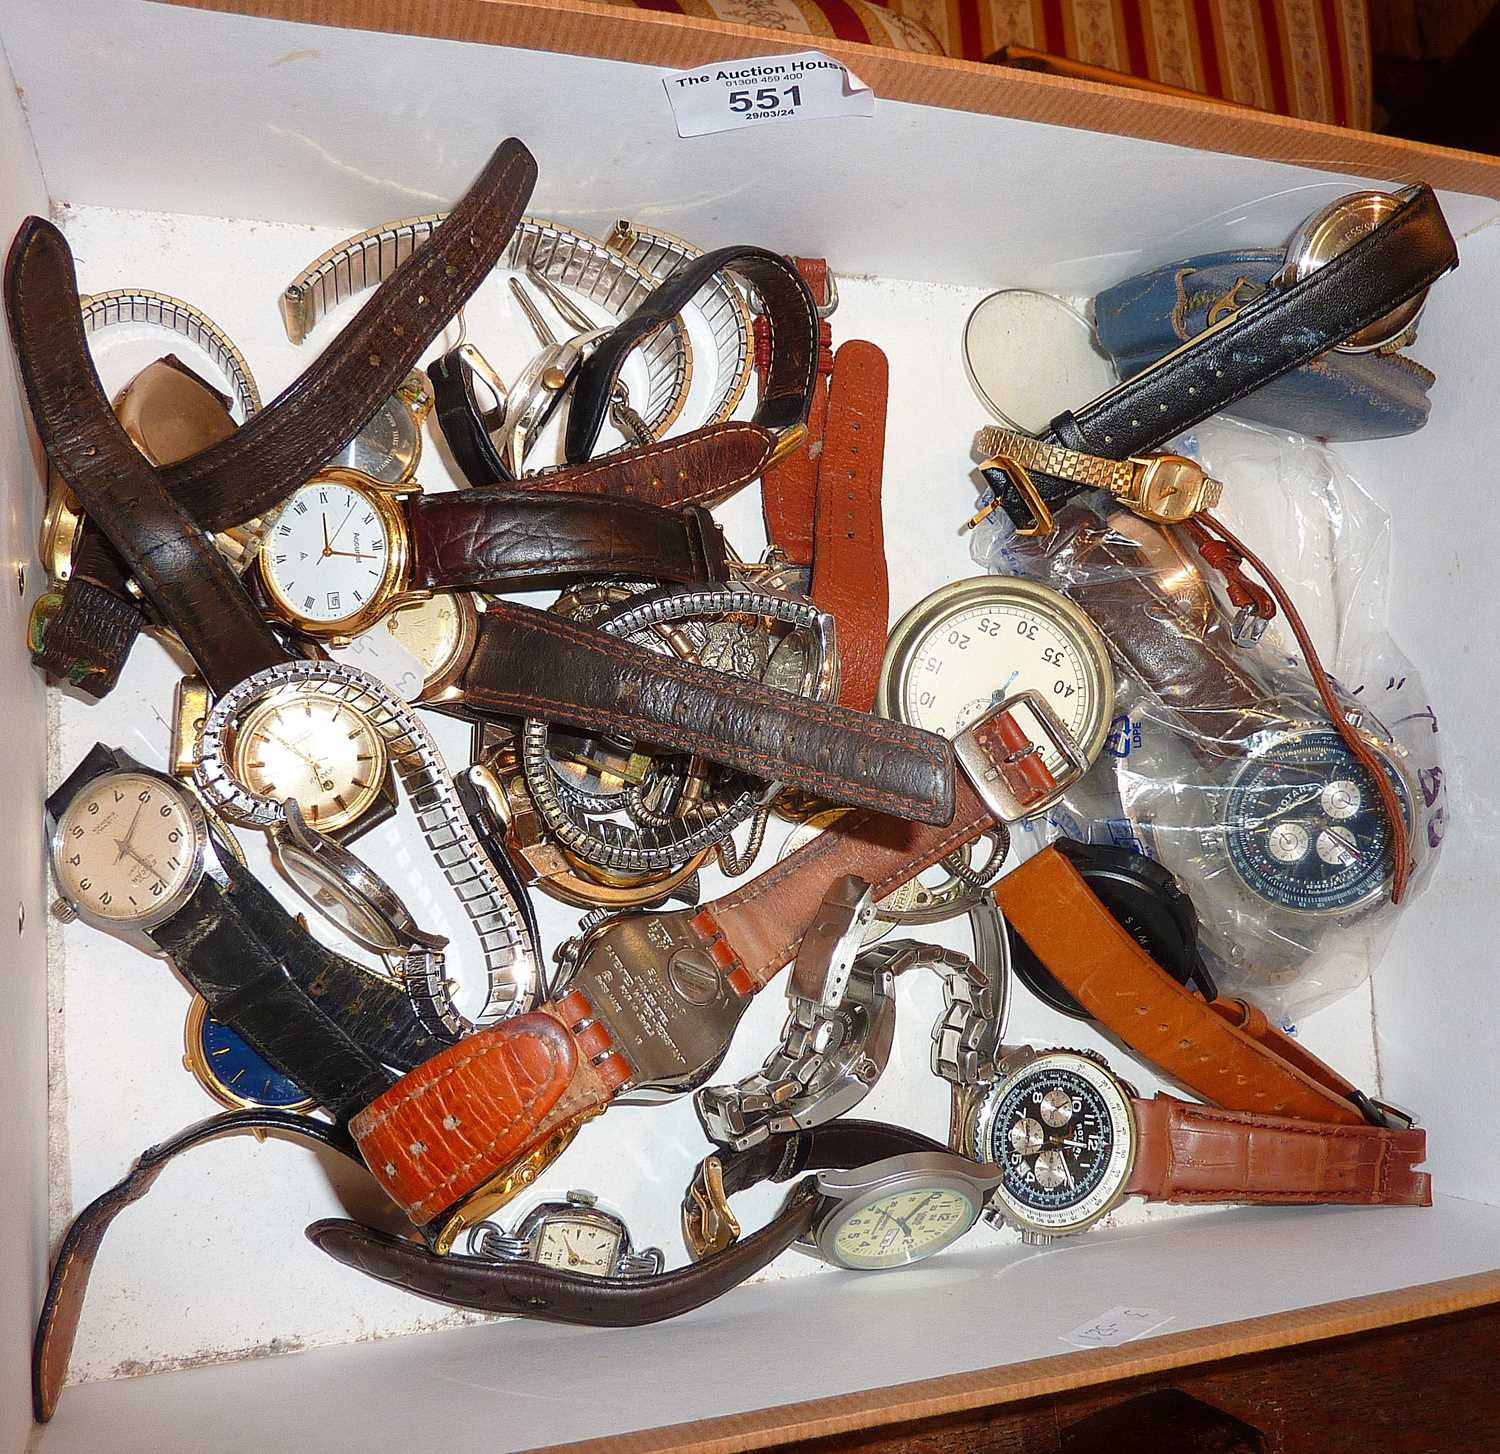 Collection of assorted wrist watches including Accurist, Seiko, Lorus, Rotary etc - Image 3 of 3